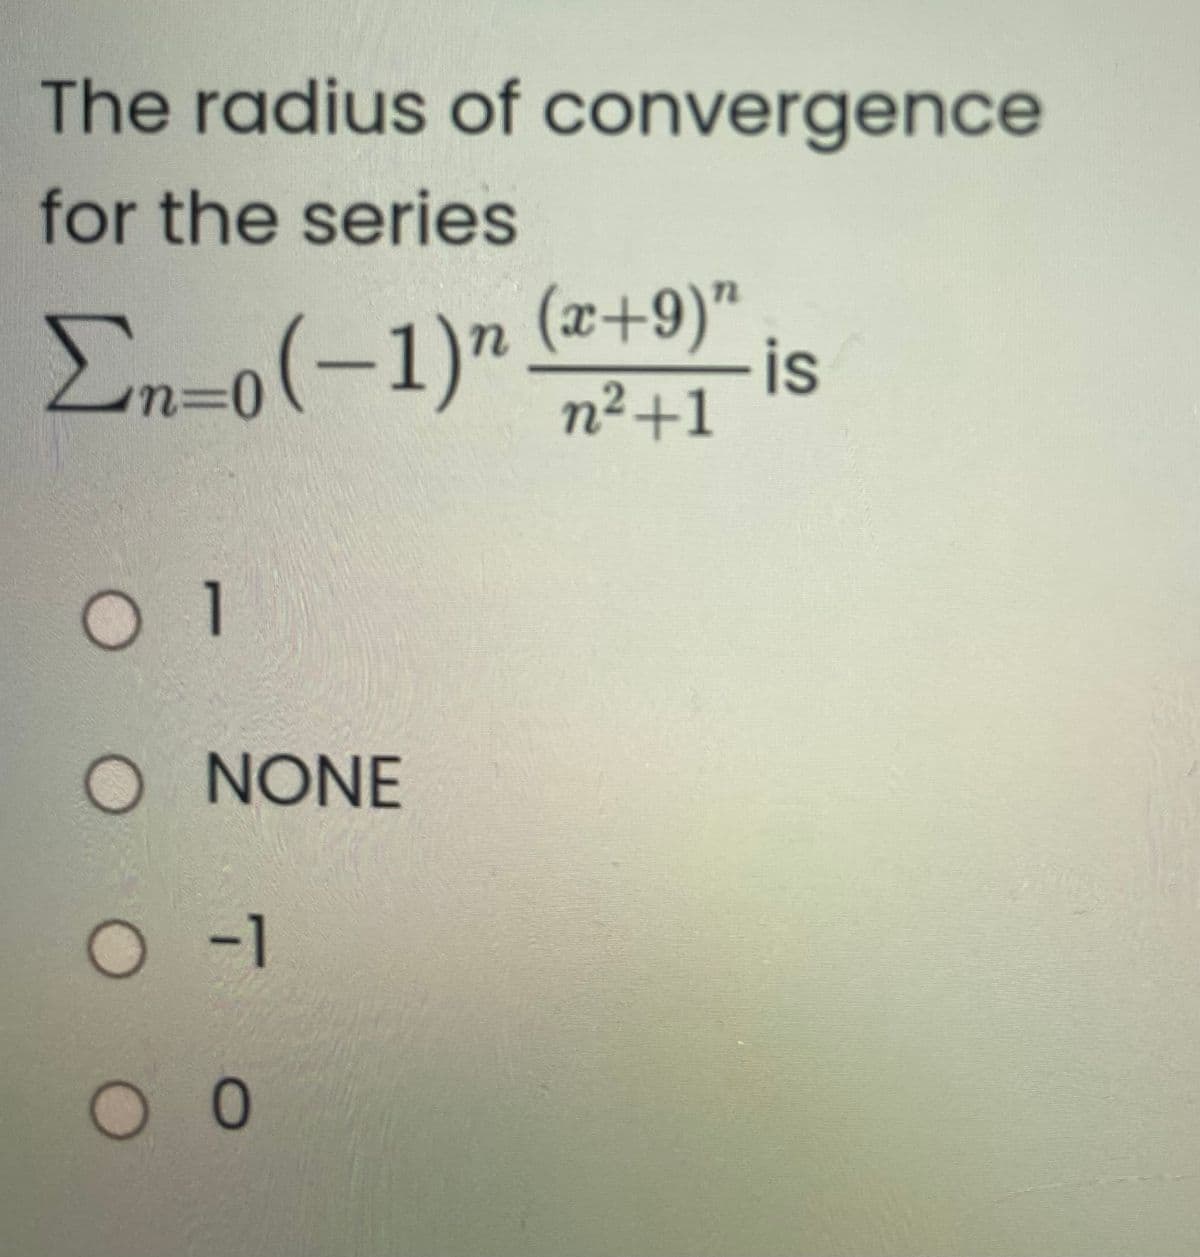 The radius of convergence
for the series
En=o(-1)"
(z+9)" ,.
is
n%3D0
n²+1
1
O NONE
O -1
